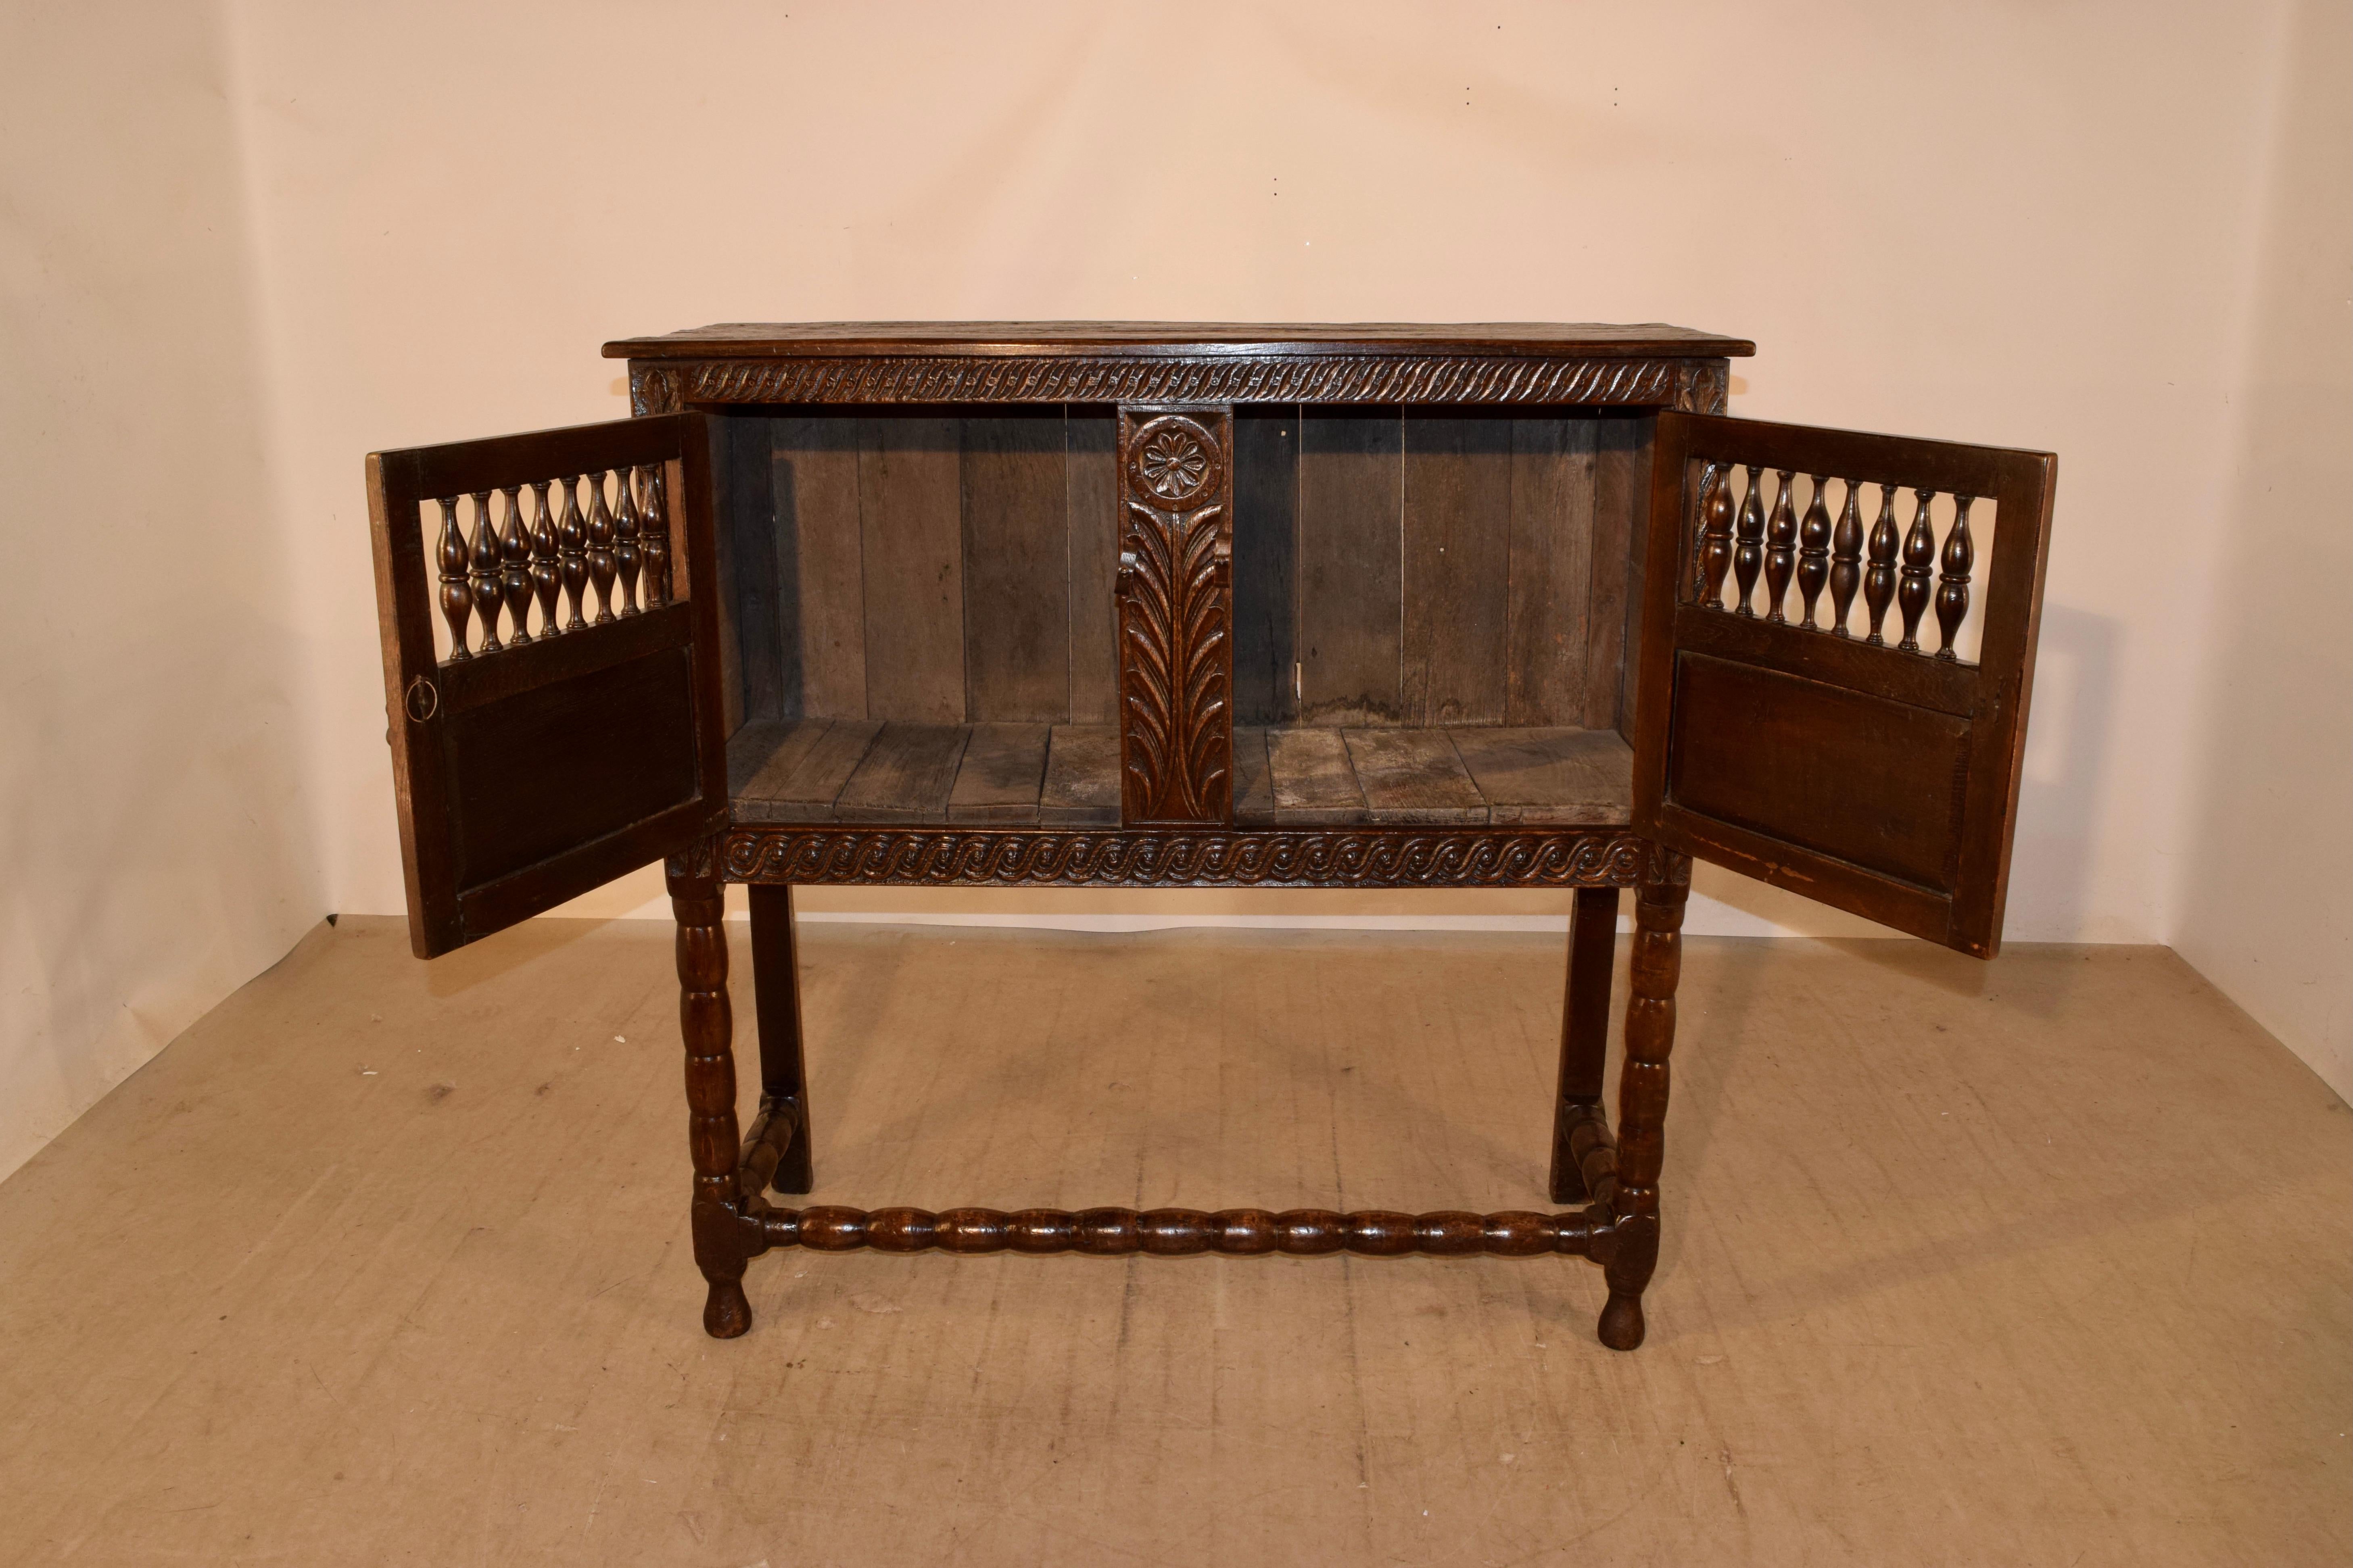 17th century oak aubrey food cupboard from England. The top is simple and has pegged construction, following down to simply paneled sides and two wonderfully hand carved doors, which open to reveal storage. The piece is supported on hand turned